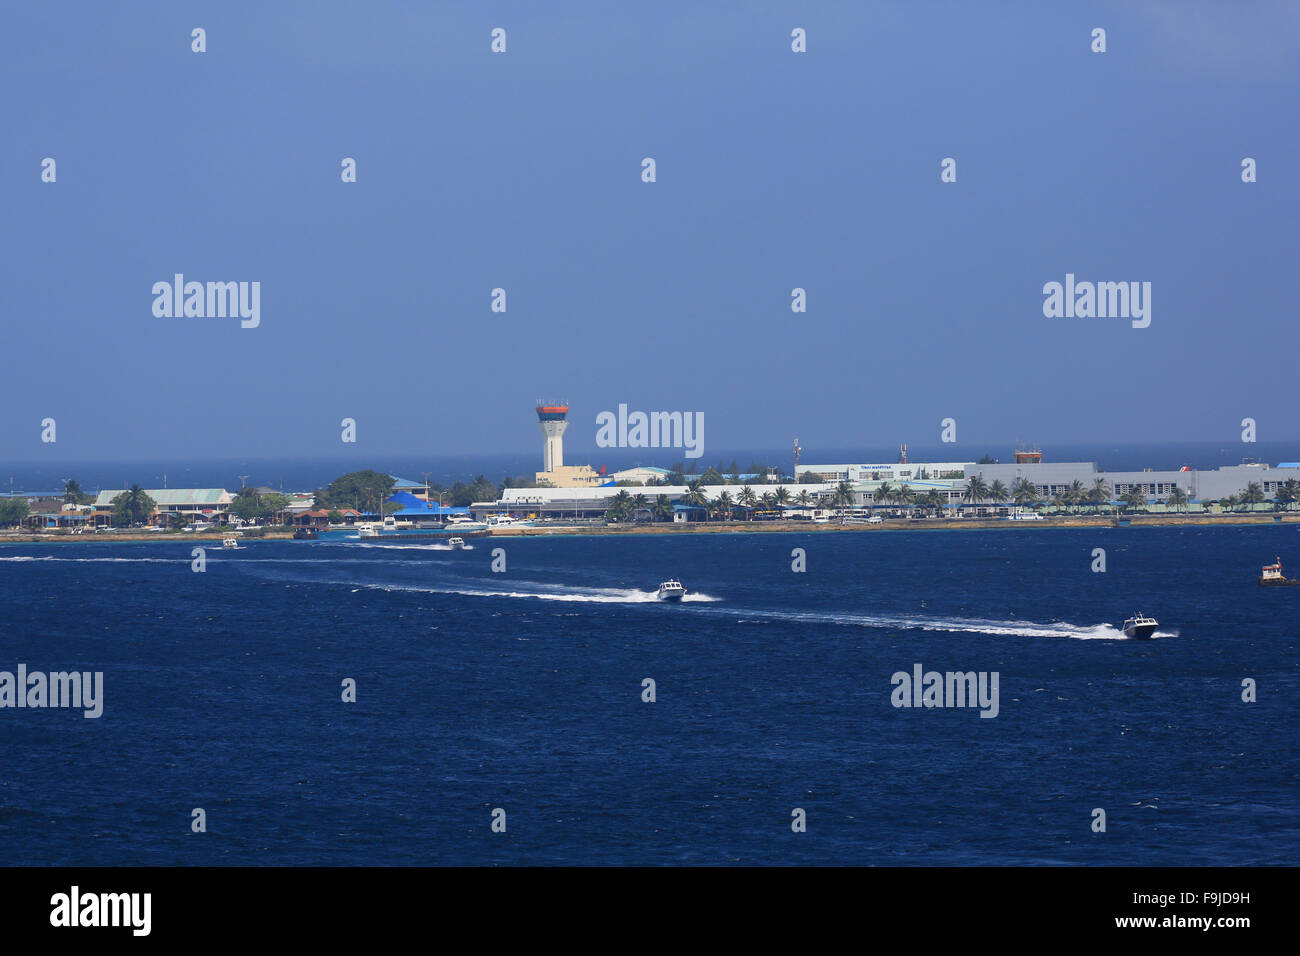 Boat traffic from the airport to the island of Male in the Maldives, Indian Ocean, as taken from a passing cruise ship. Stock Photo